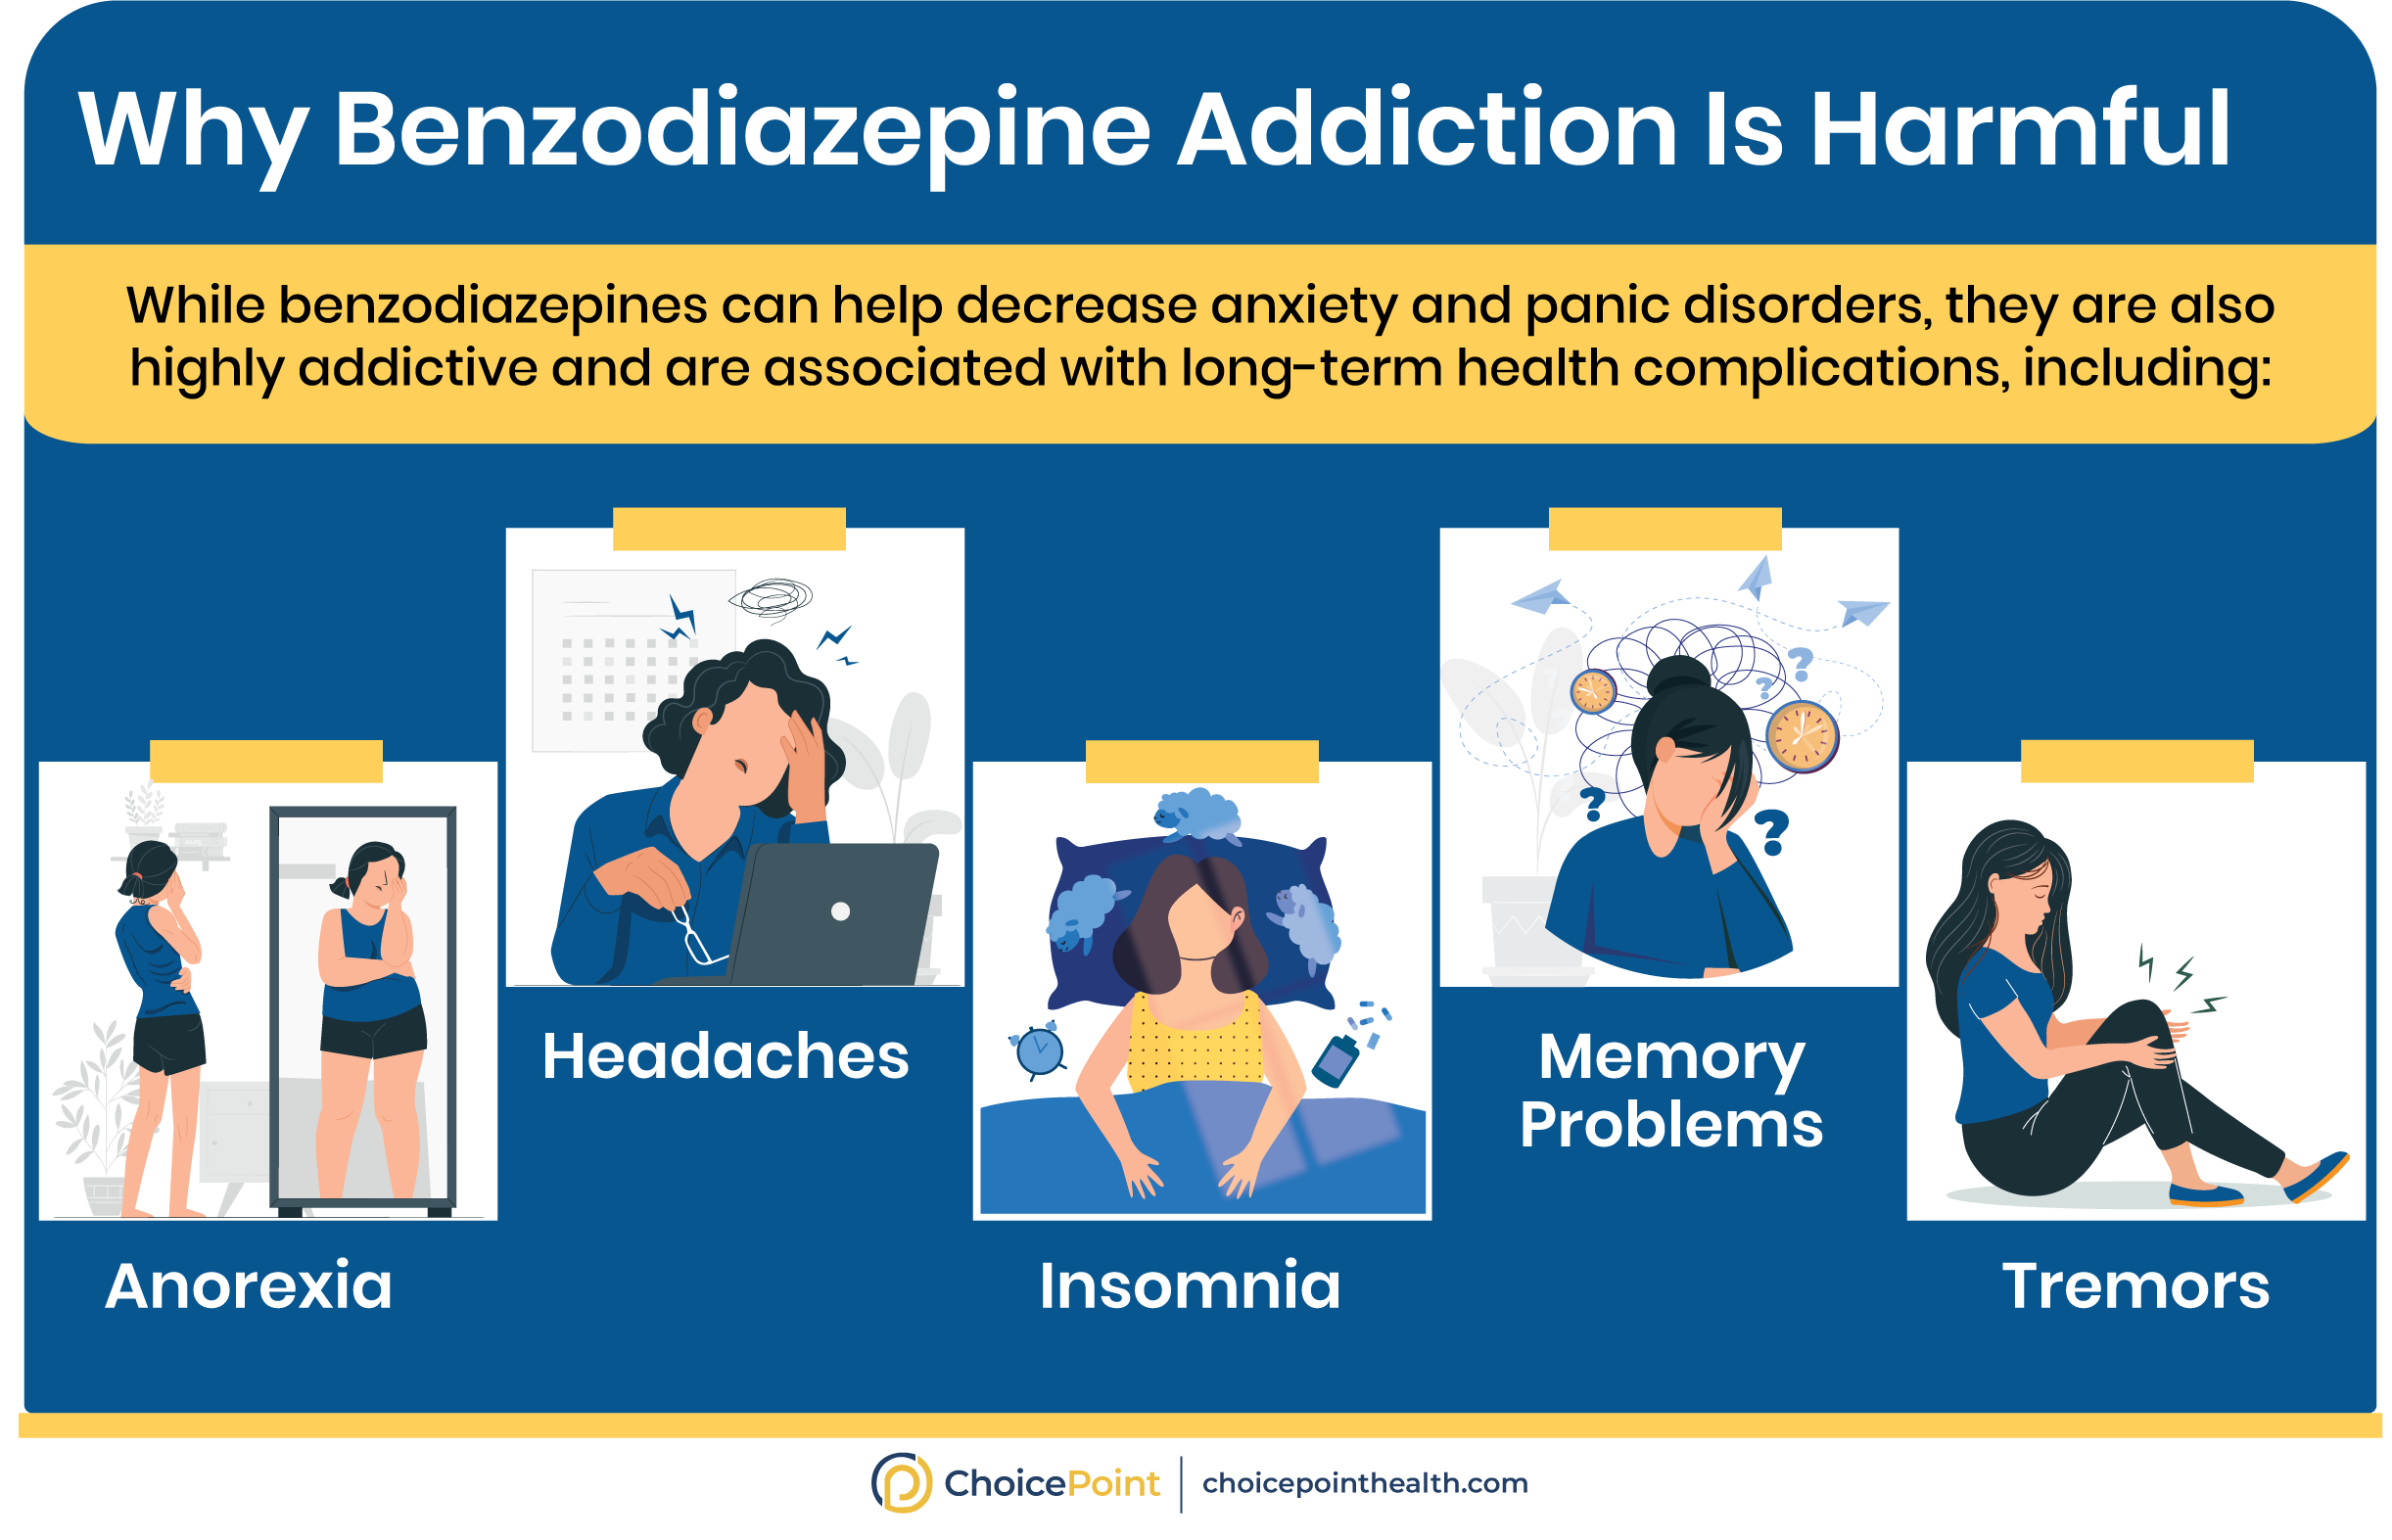 Health Risks of Benzodiazepine Abuse